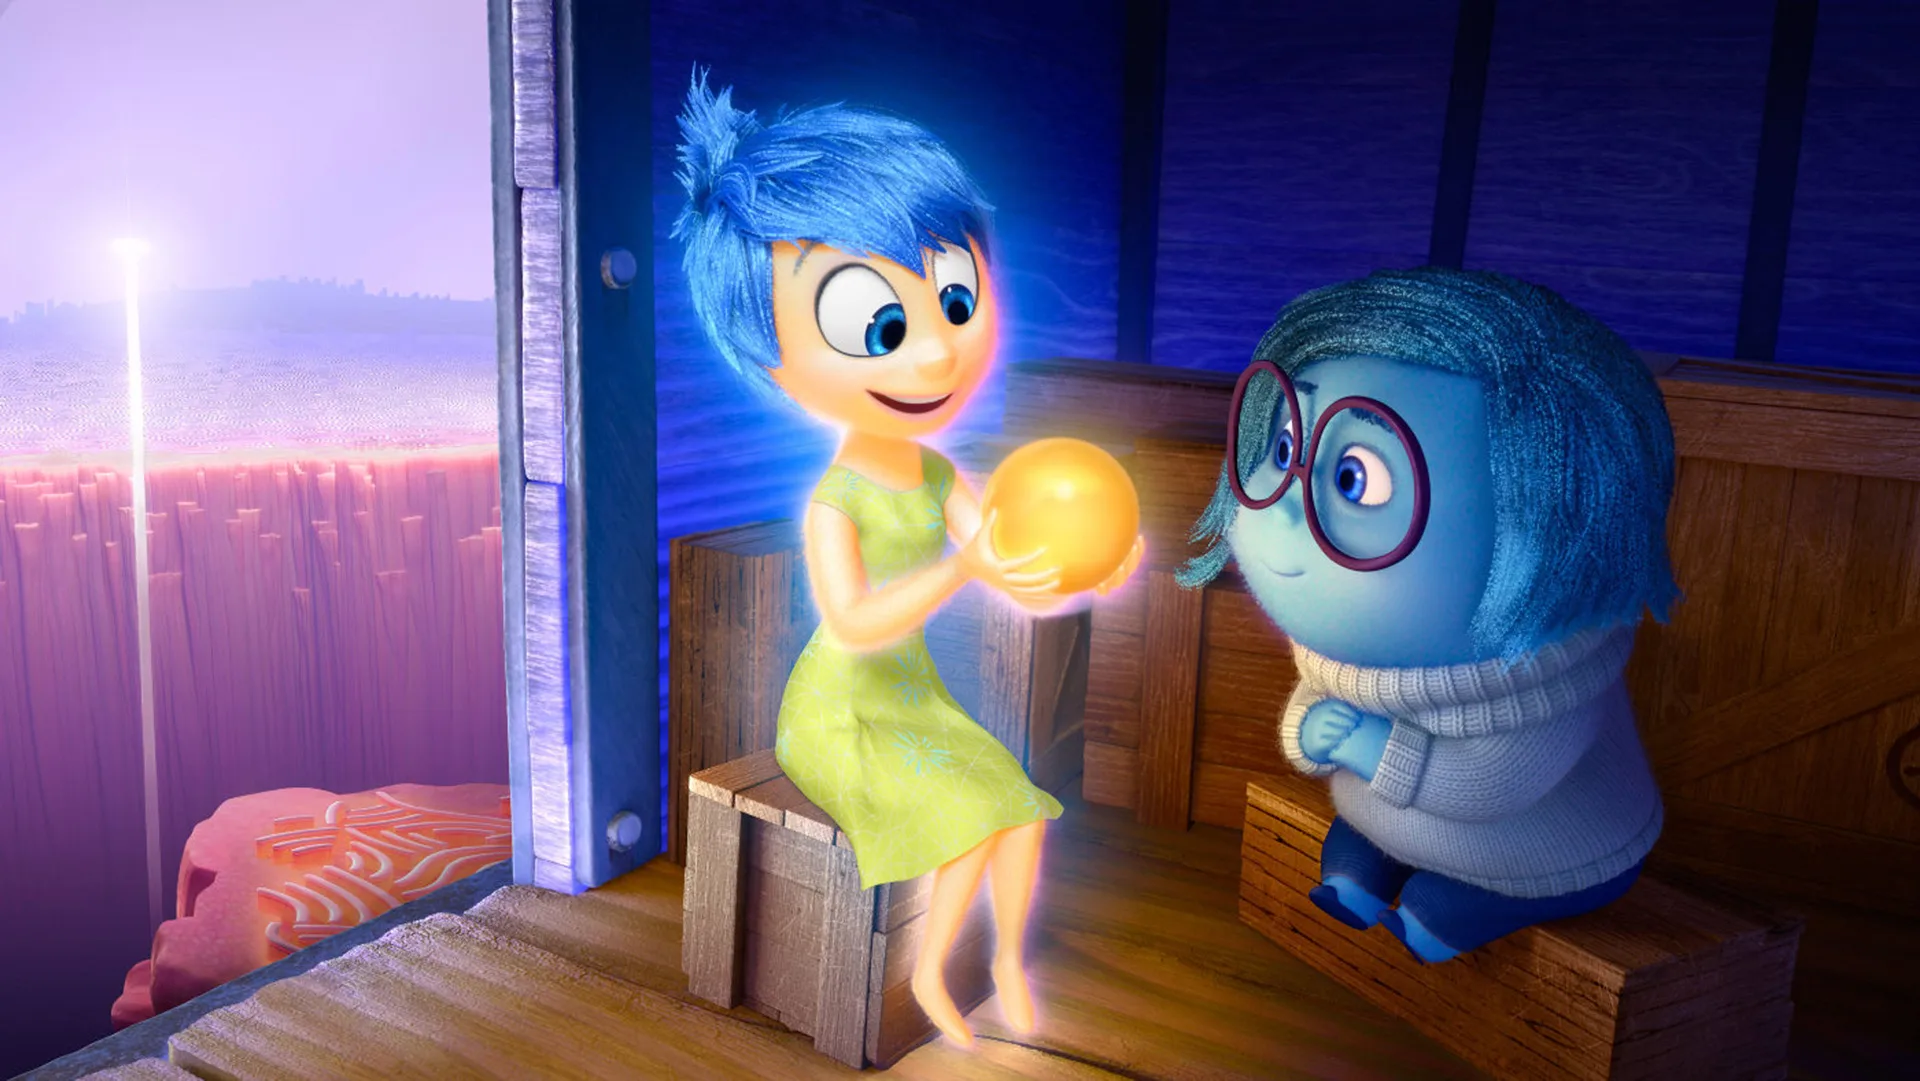 A scene from the Disney/Pixar film Inside Out showing the character Joy holding a happy memory orb and showing Sadness